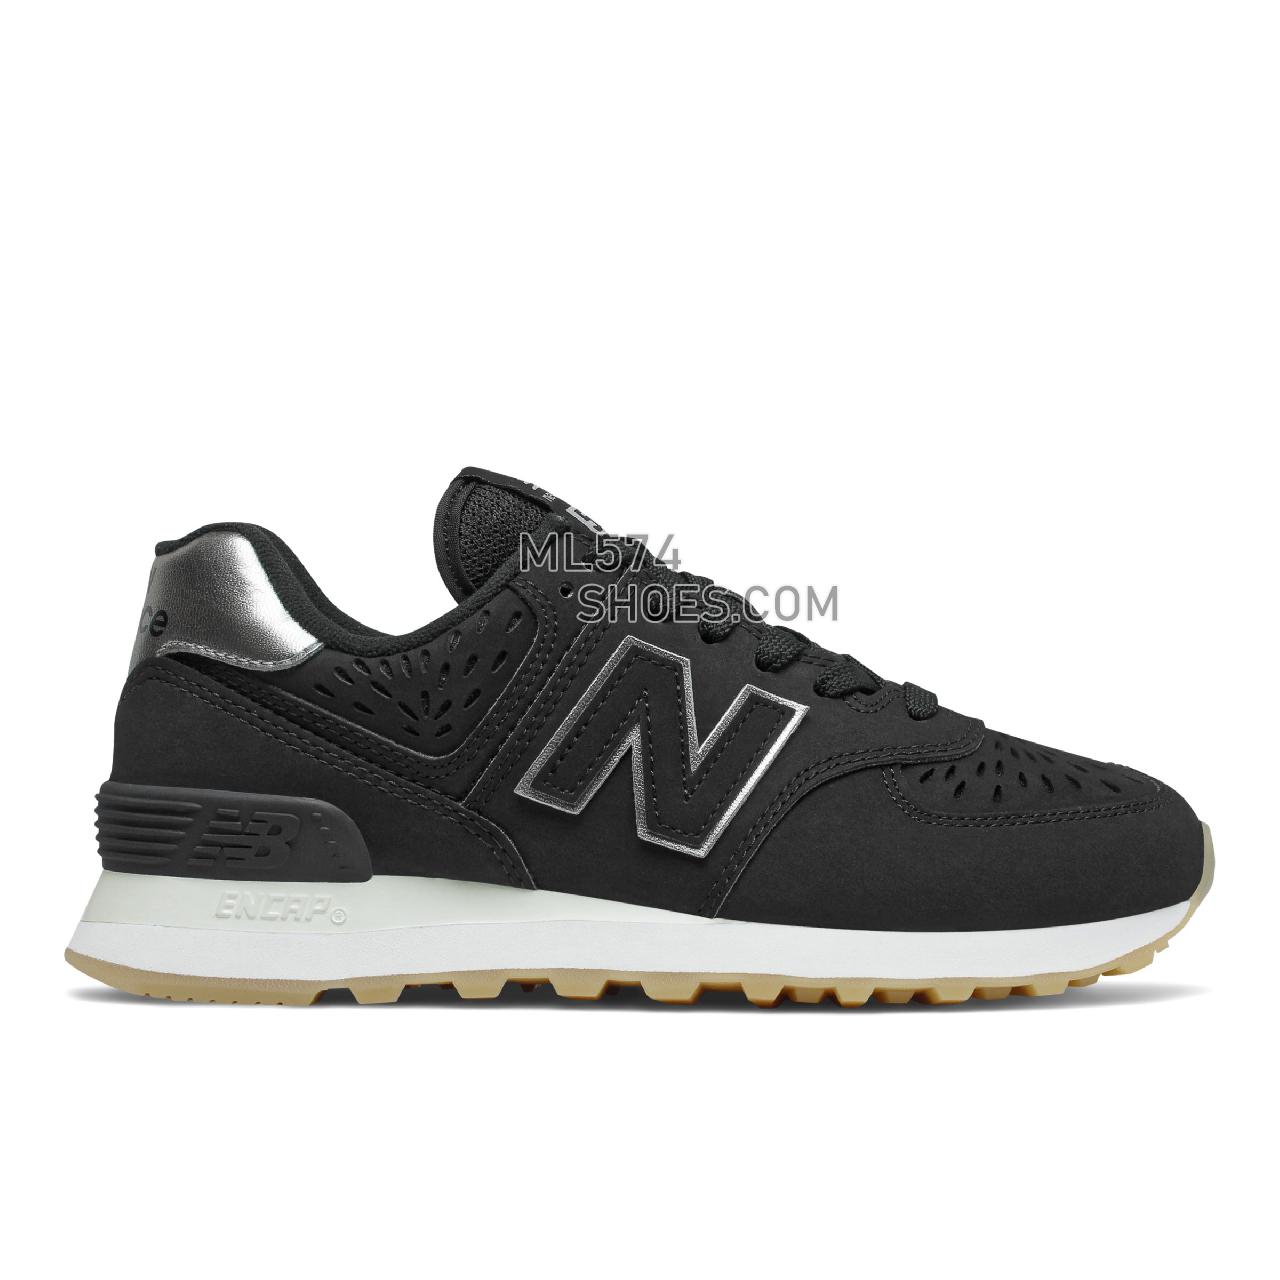 New Balance 574 - Women's Classic Sneakers - Black with Dark Silver - WL574SCP